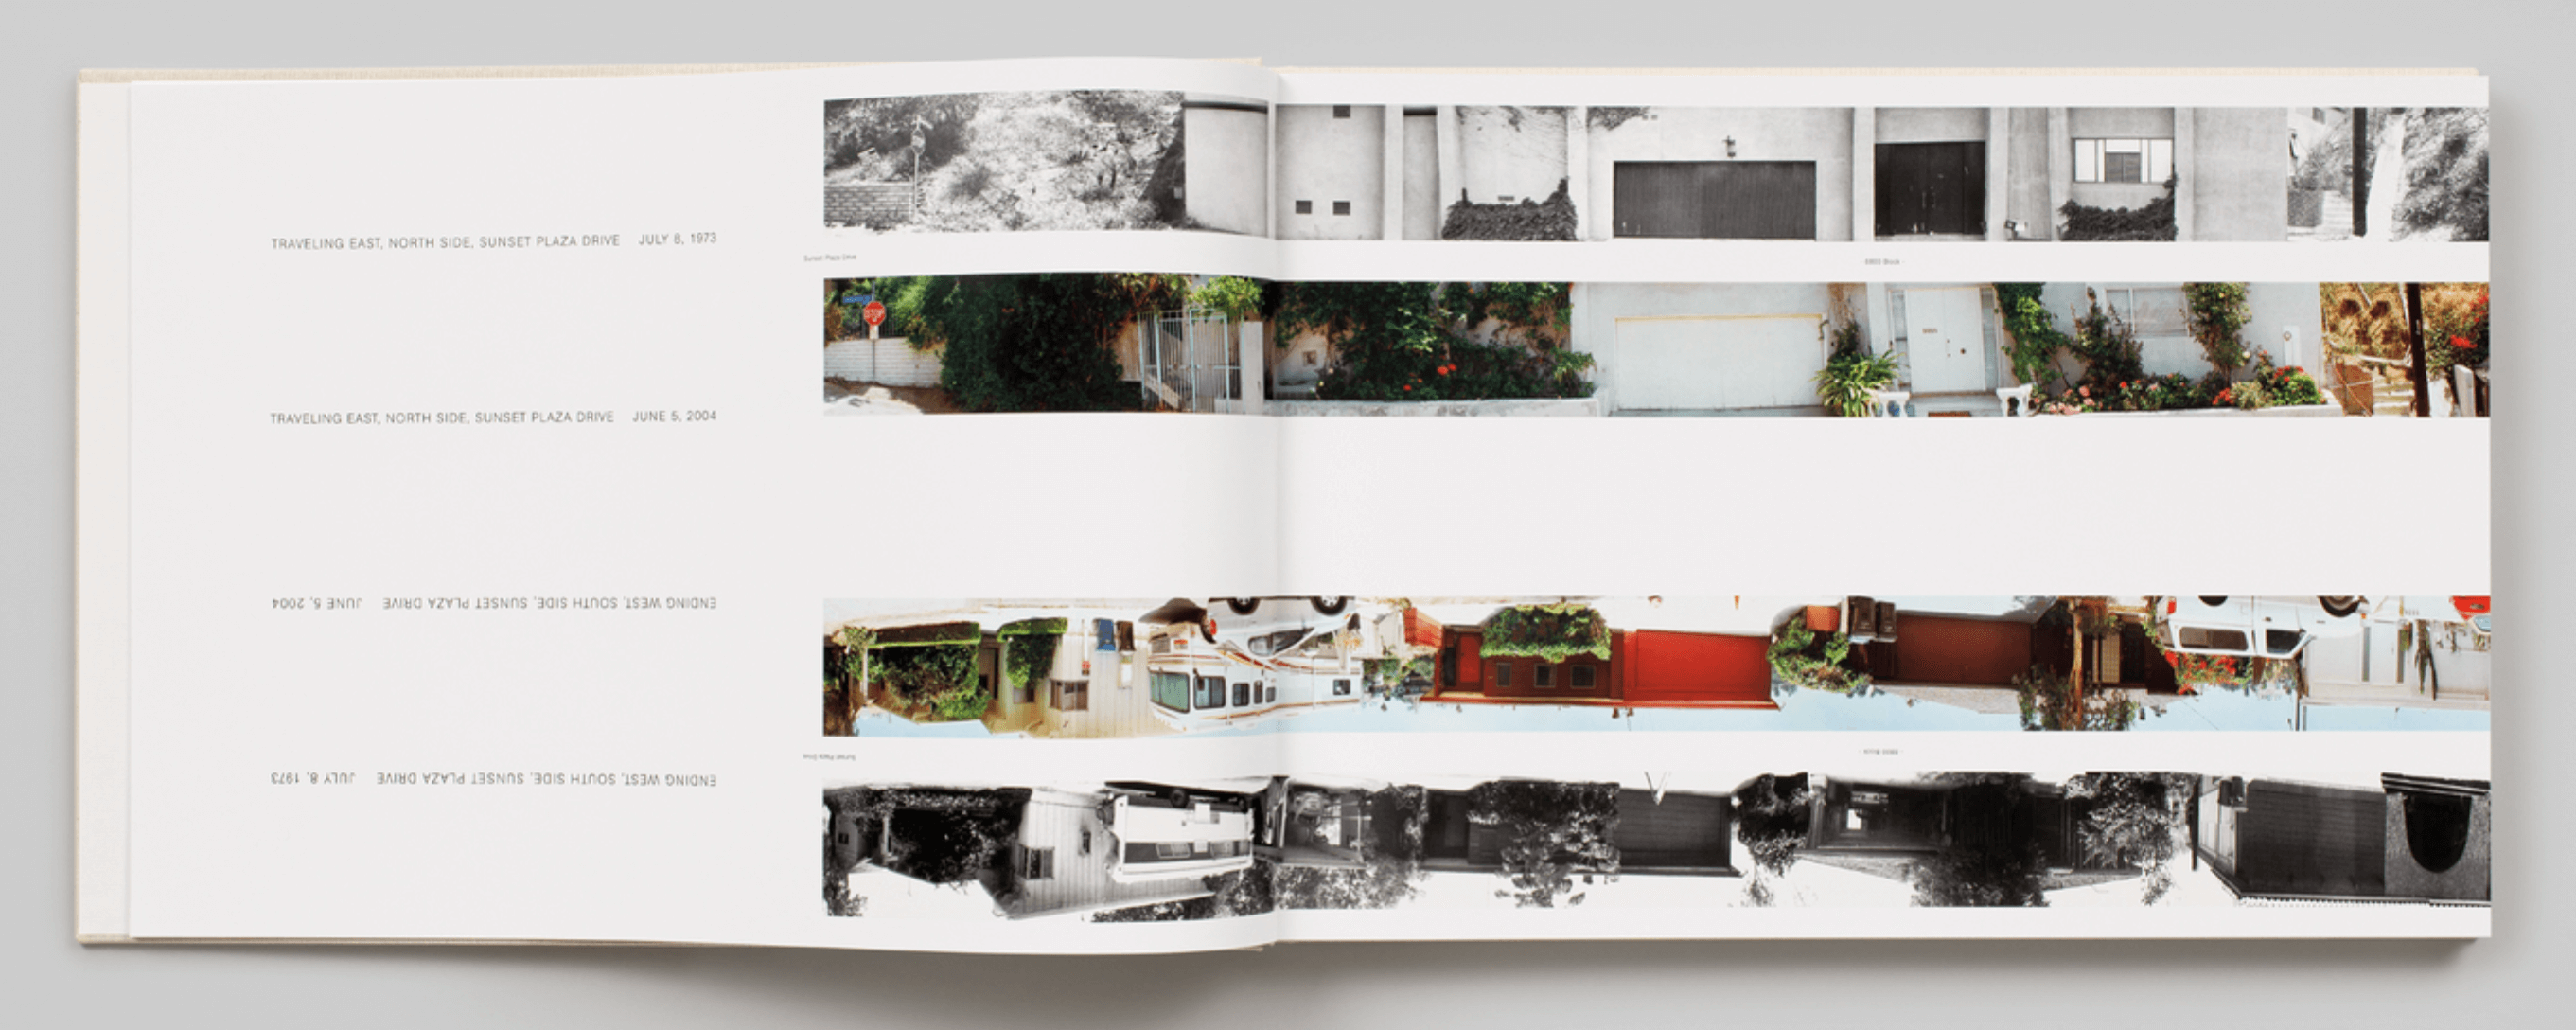 then-and-now-ed-ruschq-steidl-verlag-1